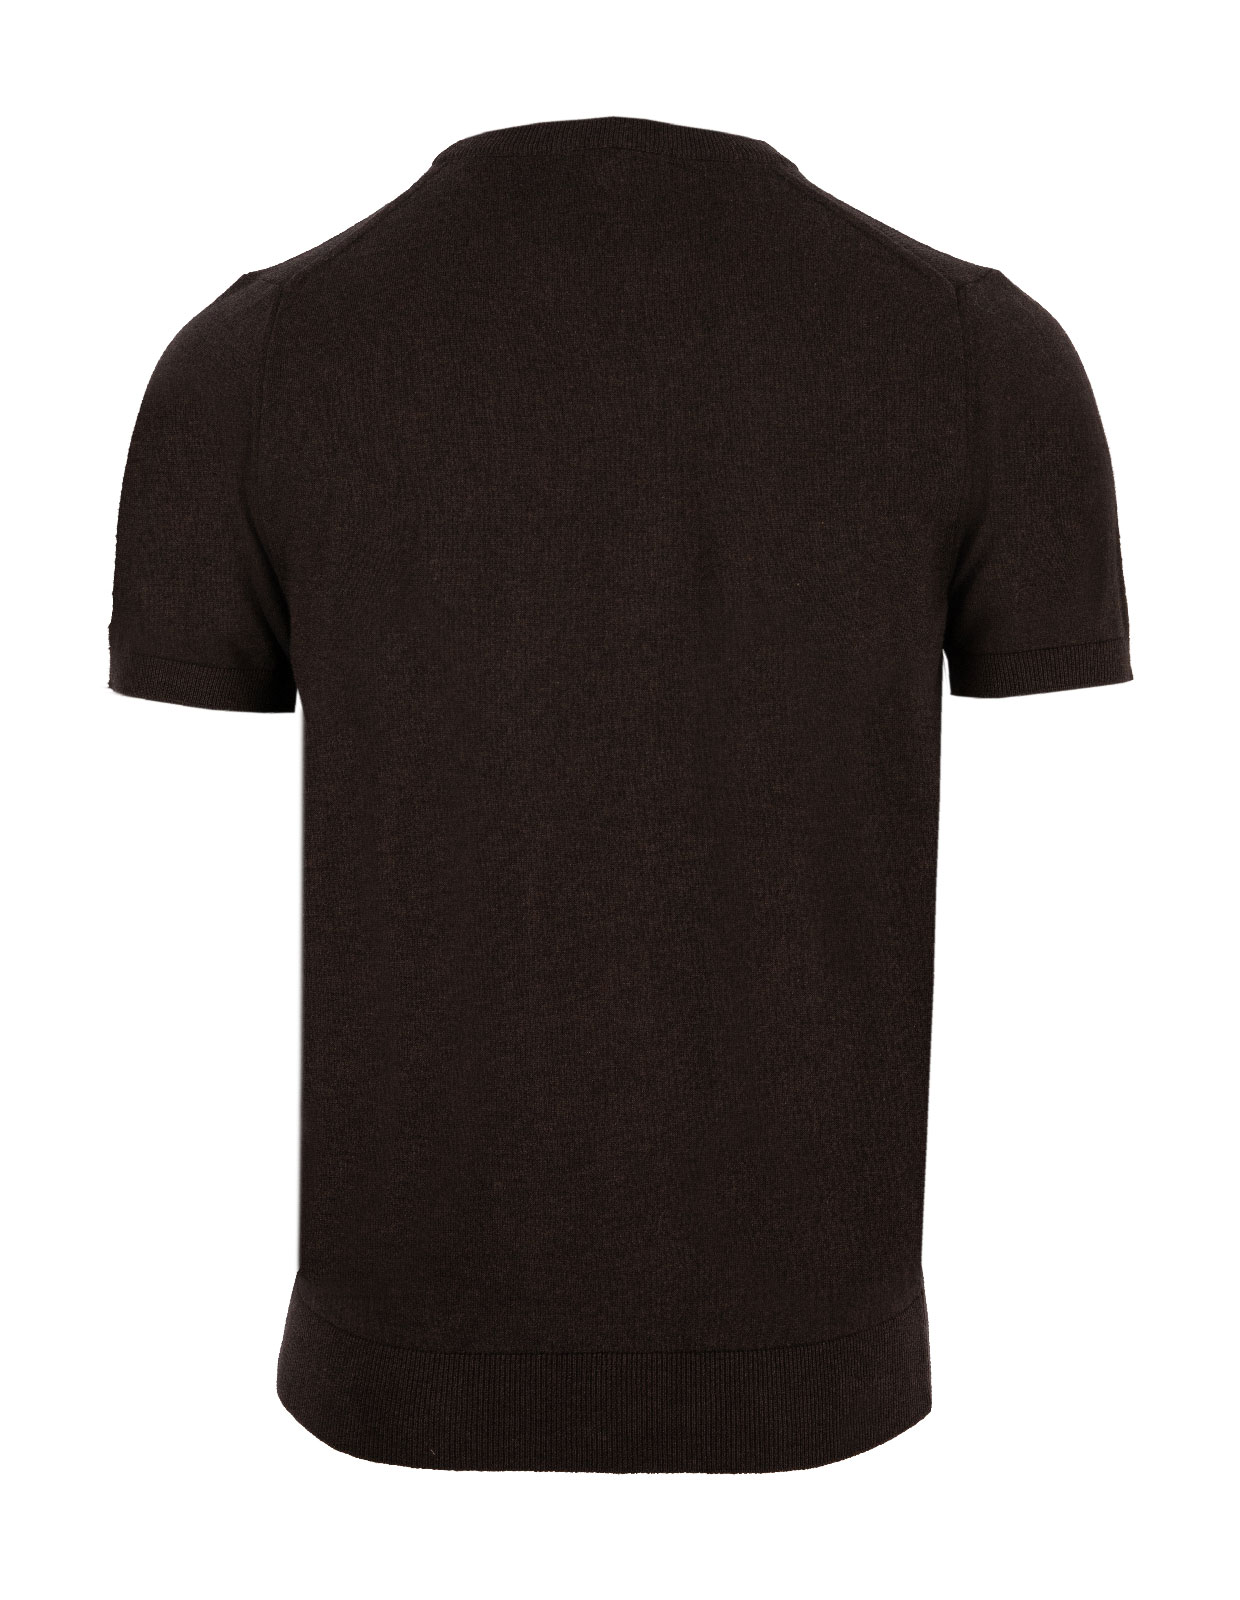 T-Shirt Knitted Cotton Chocolate